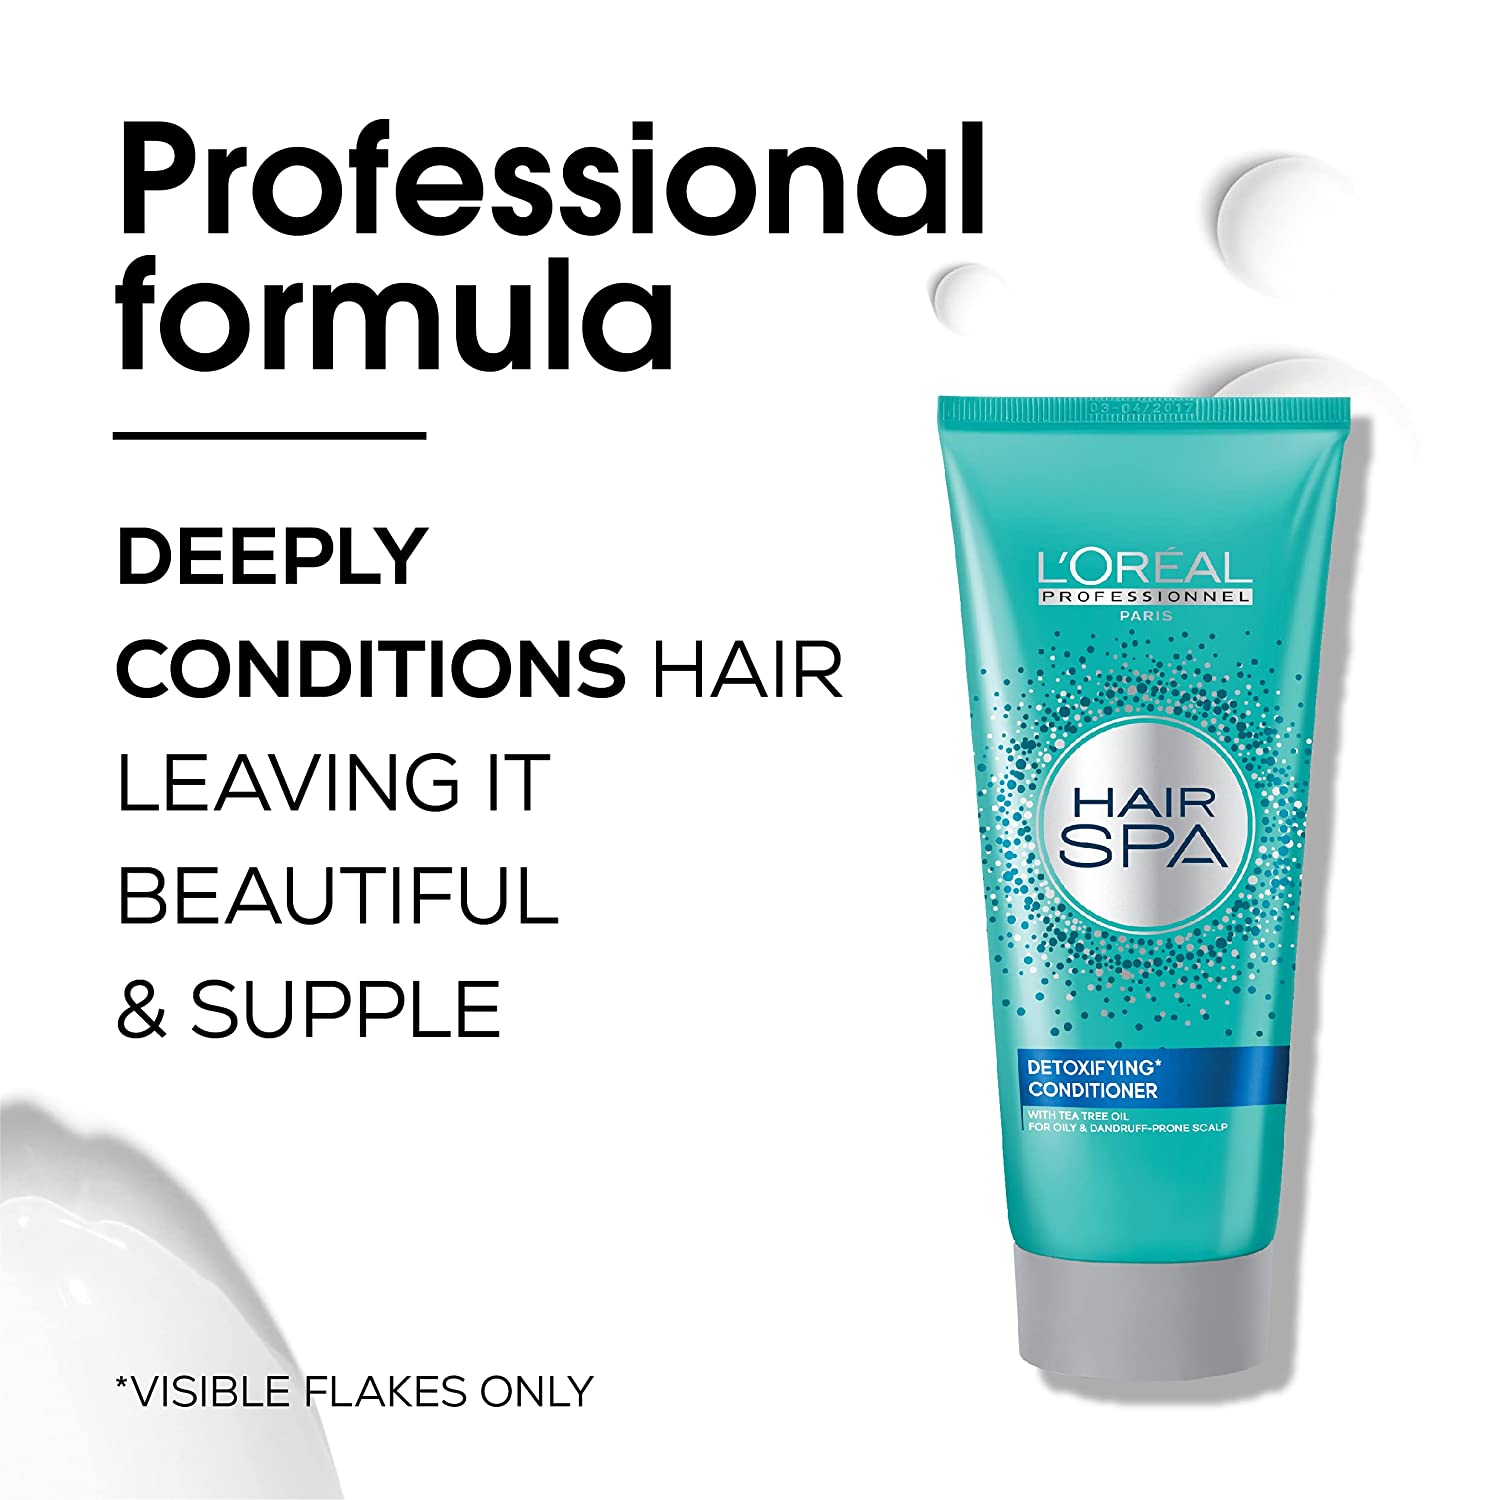 L'Oreal Professionnel Hair Spa Detoxifying Conditioner